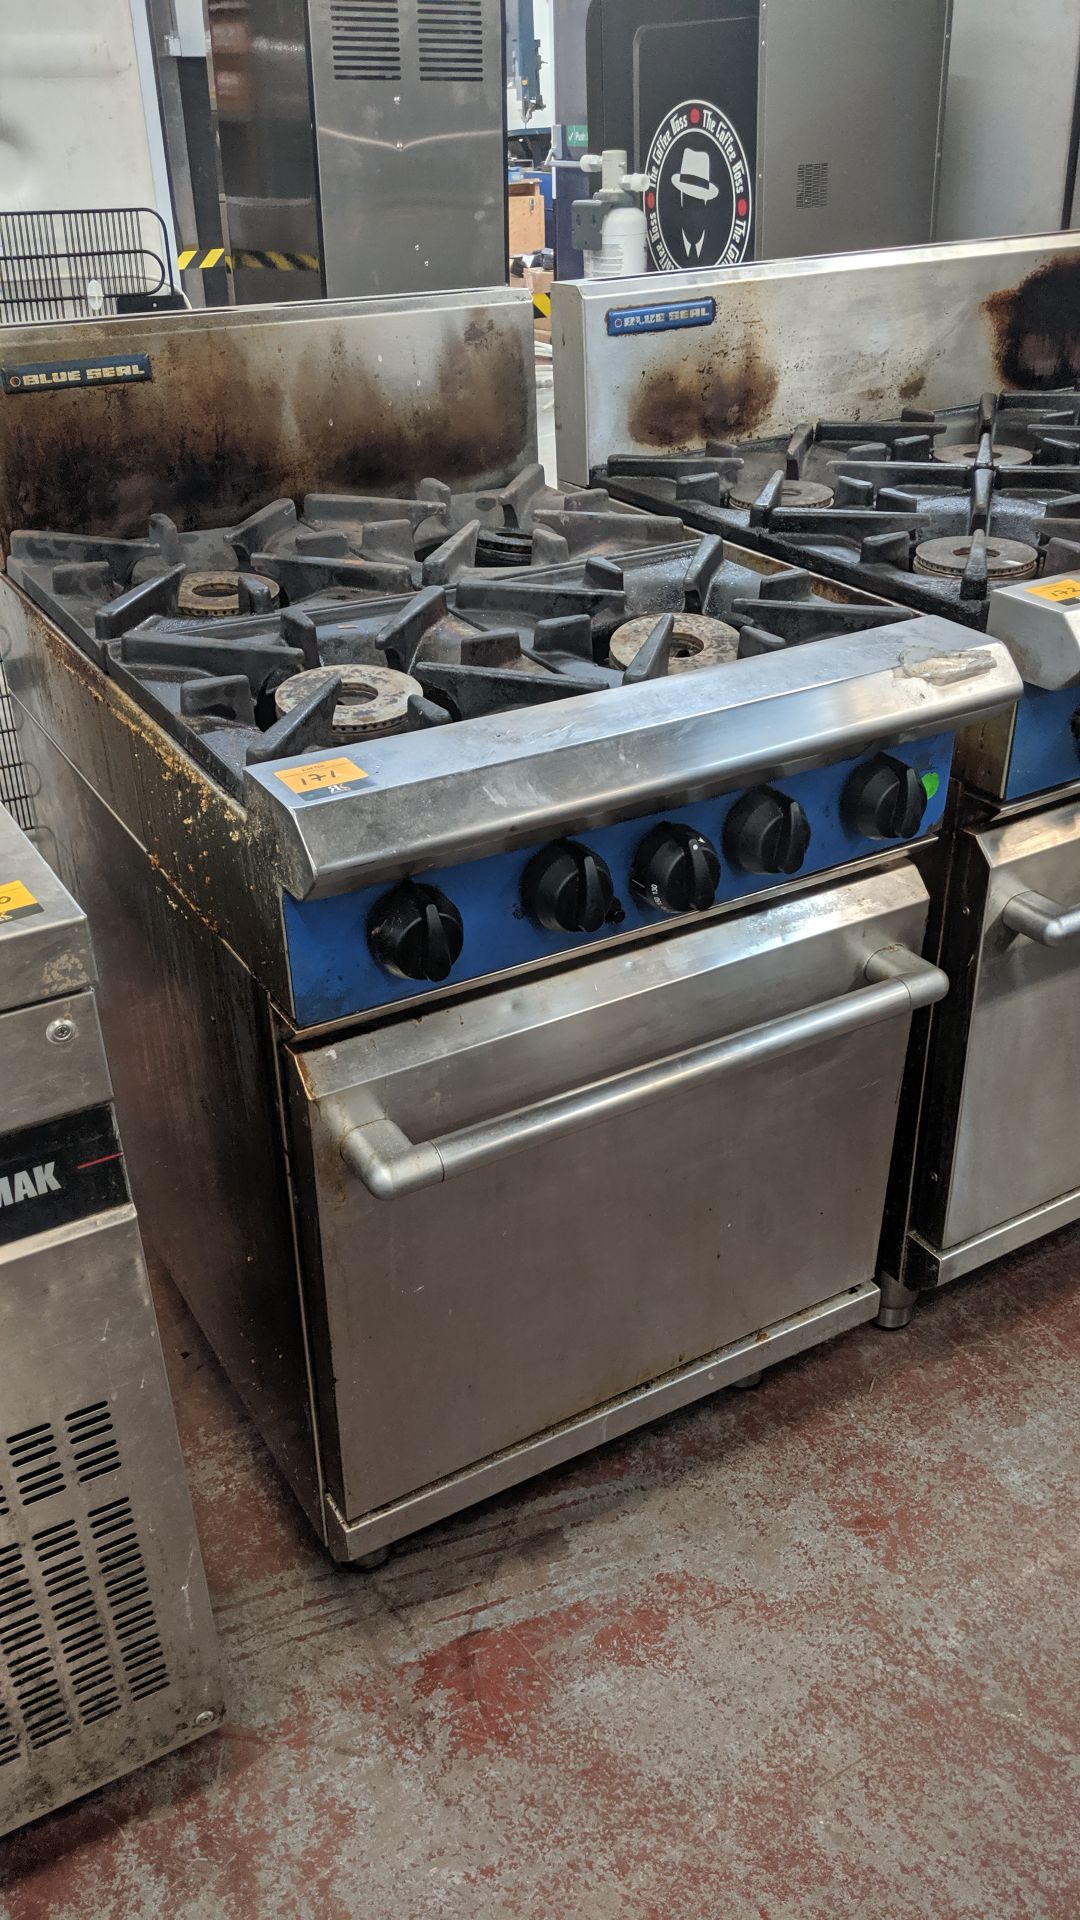 Blue Seal 4 ring gas oven - 9504DF IMPORTANT: Please remember goods successfully bid upon must be